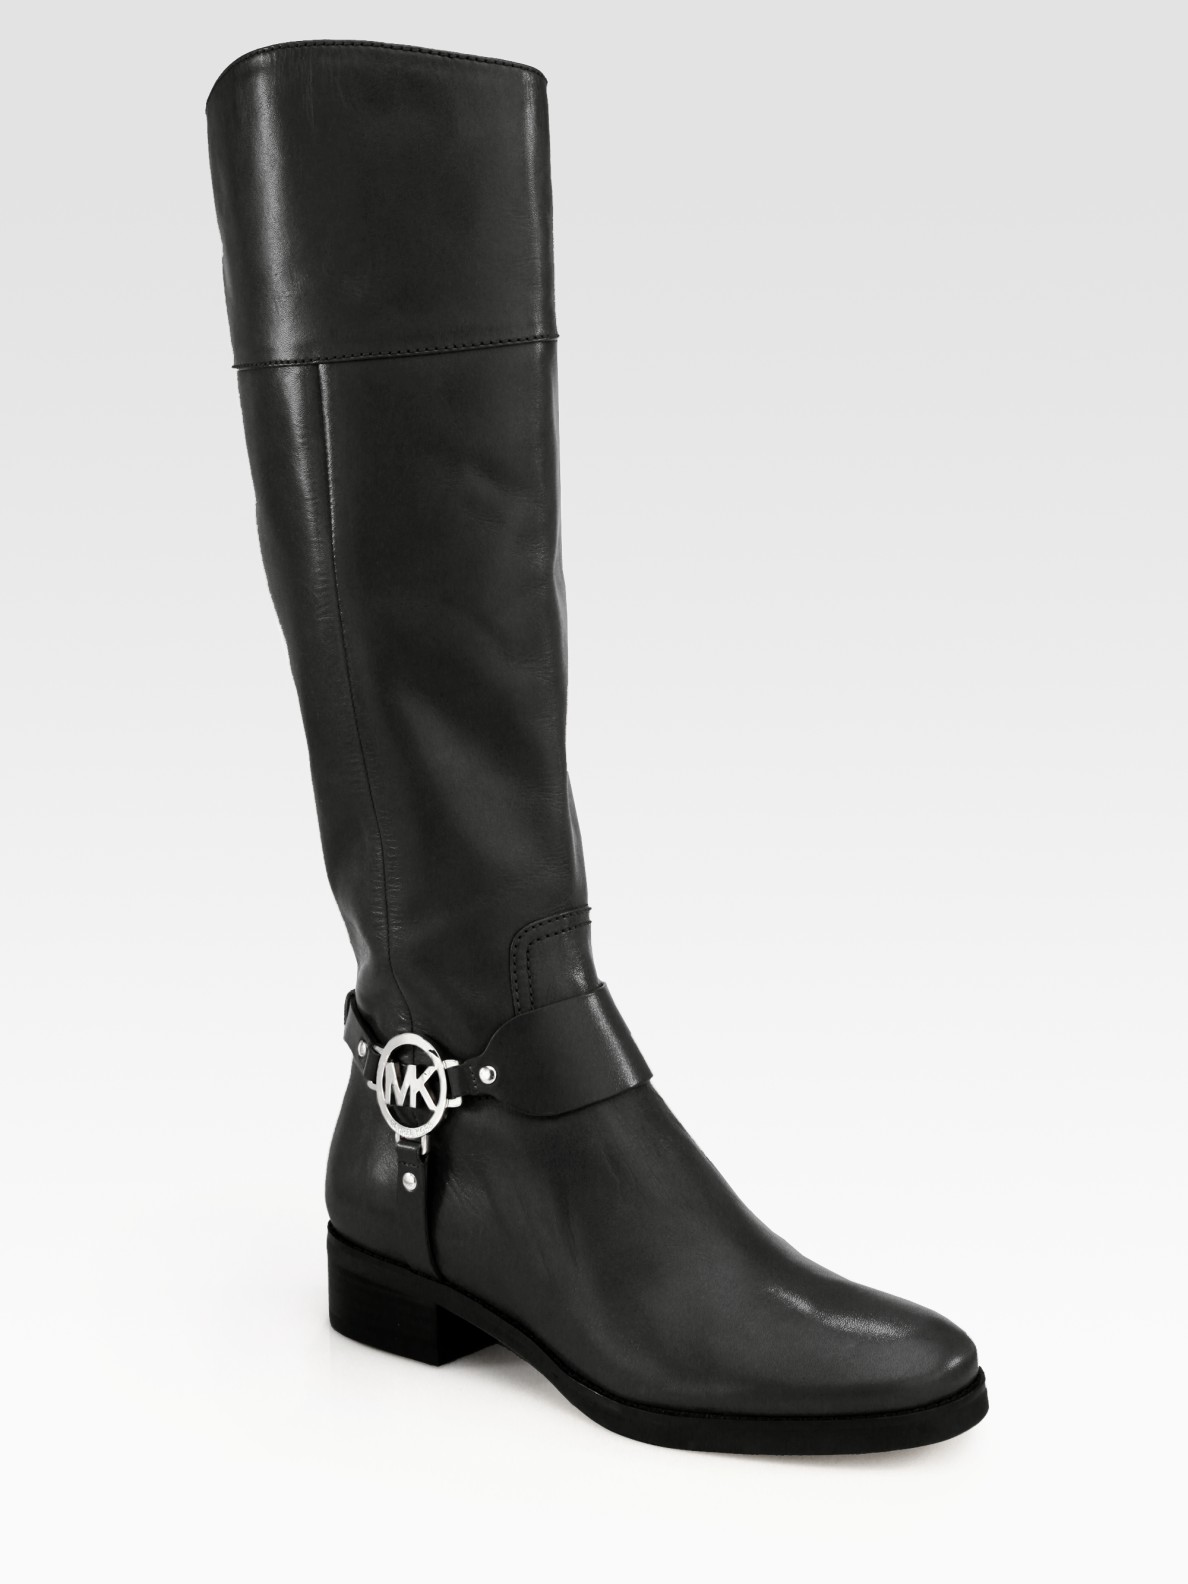 Lyst - Michael michael kors Fulton Leather Harness Boots in Black